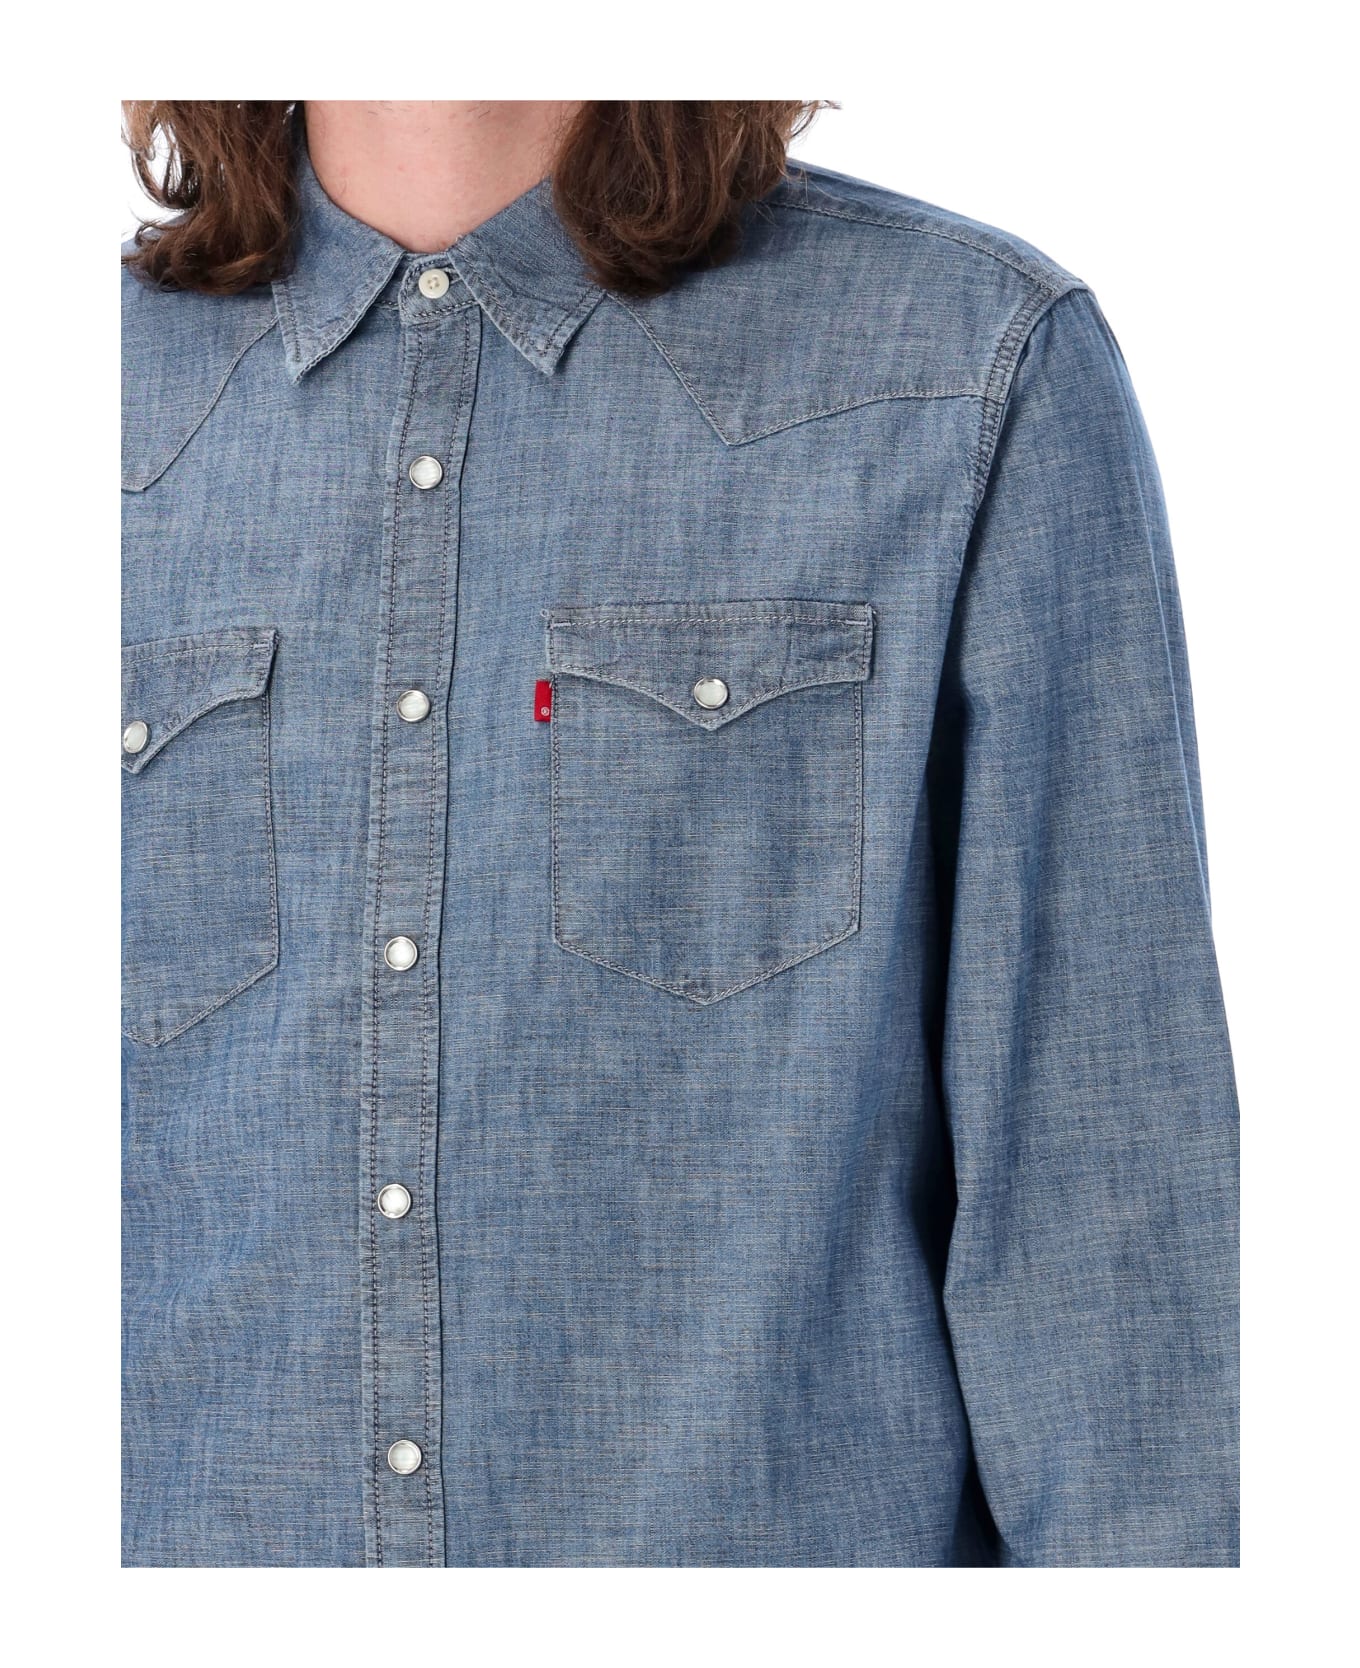 Levi's Barstow Western Shirt - MED BLUE